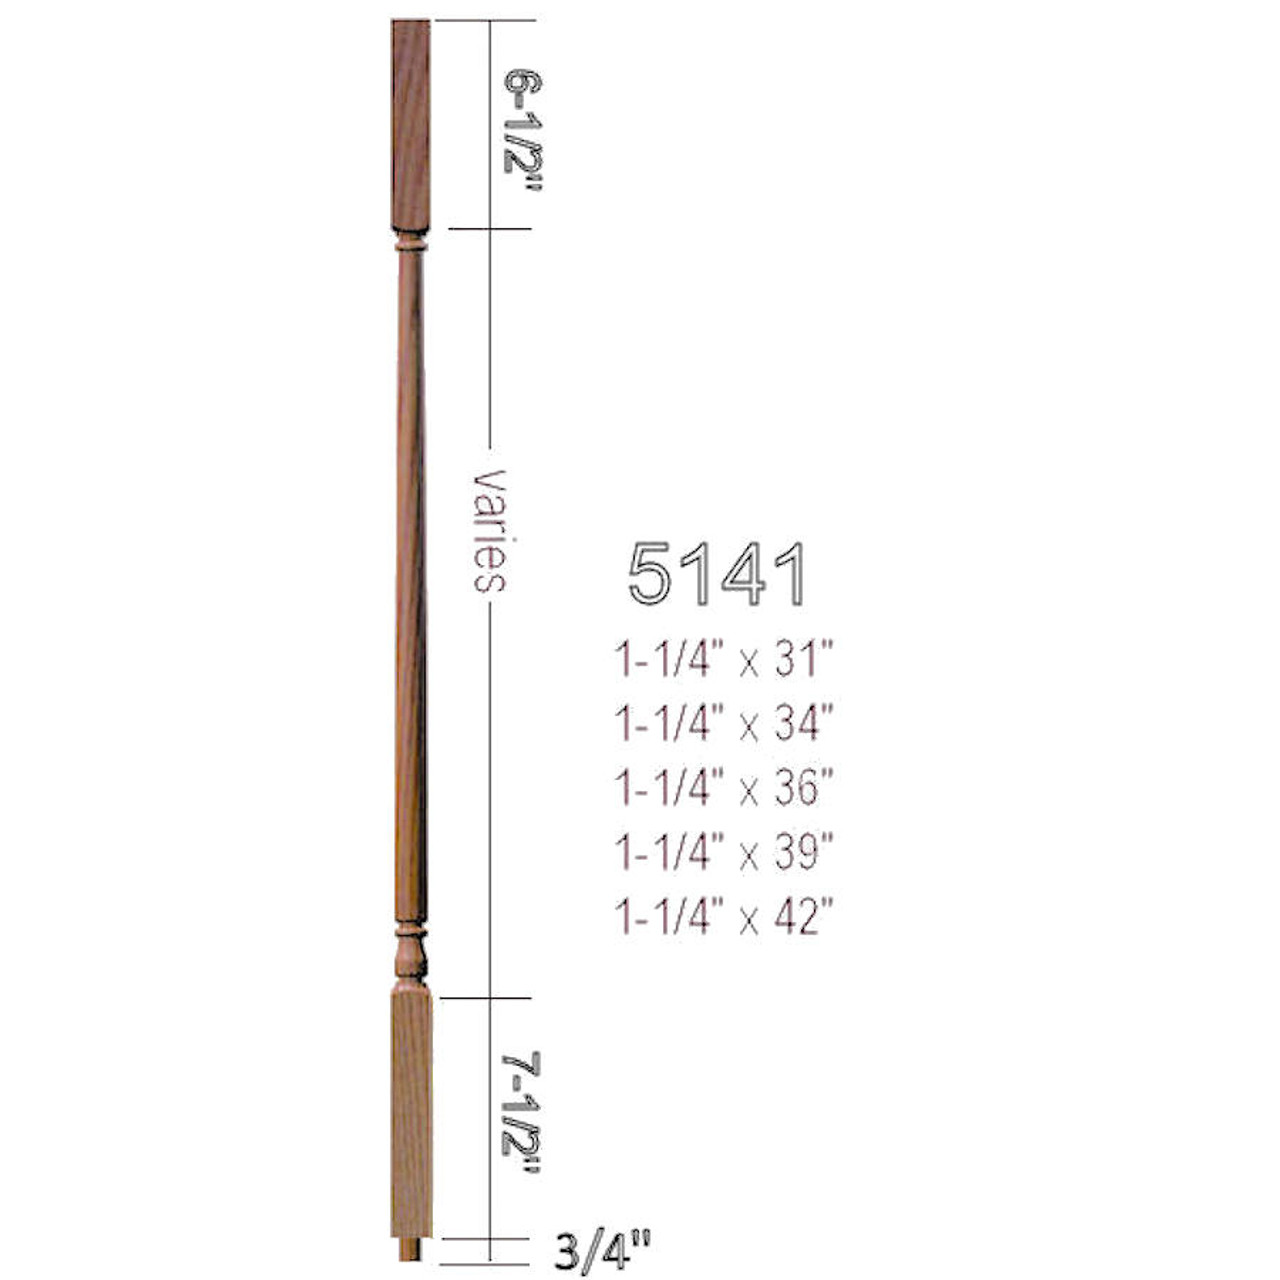 5141 31" Square Top Colonial Baluster, Dimensional Information